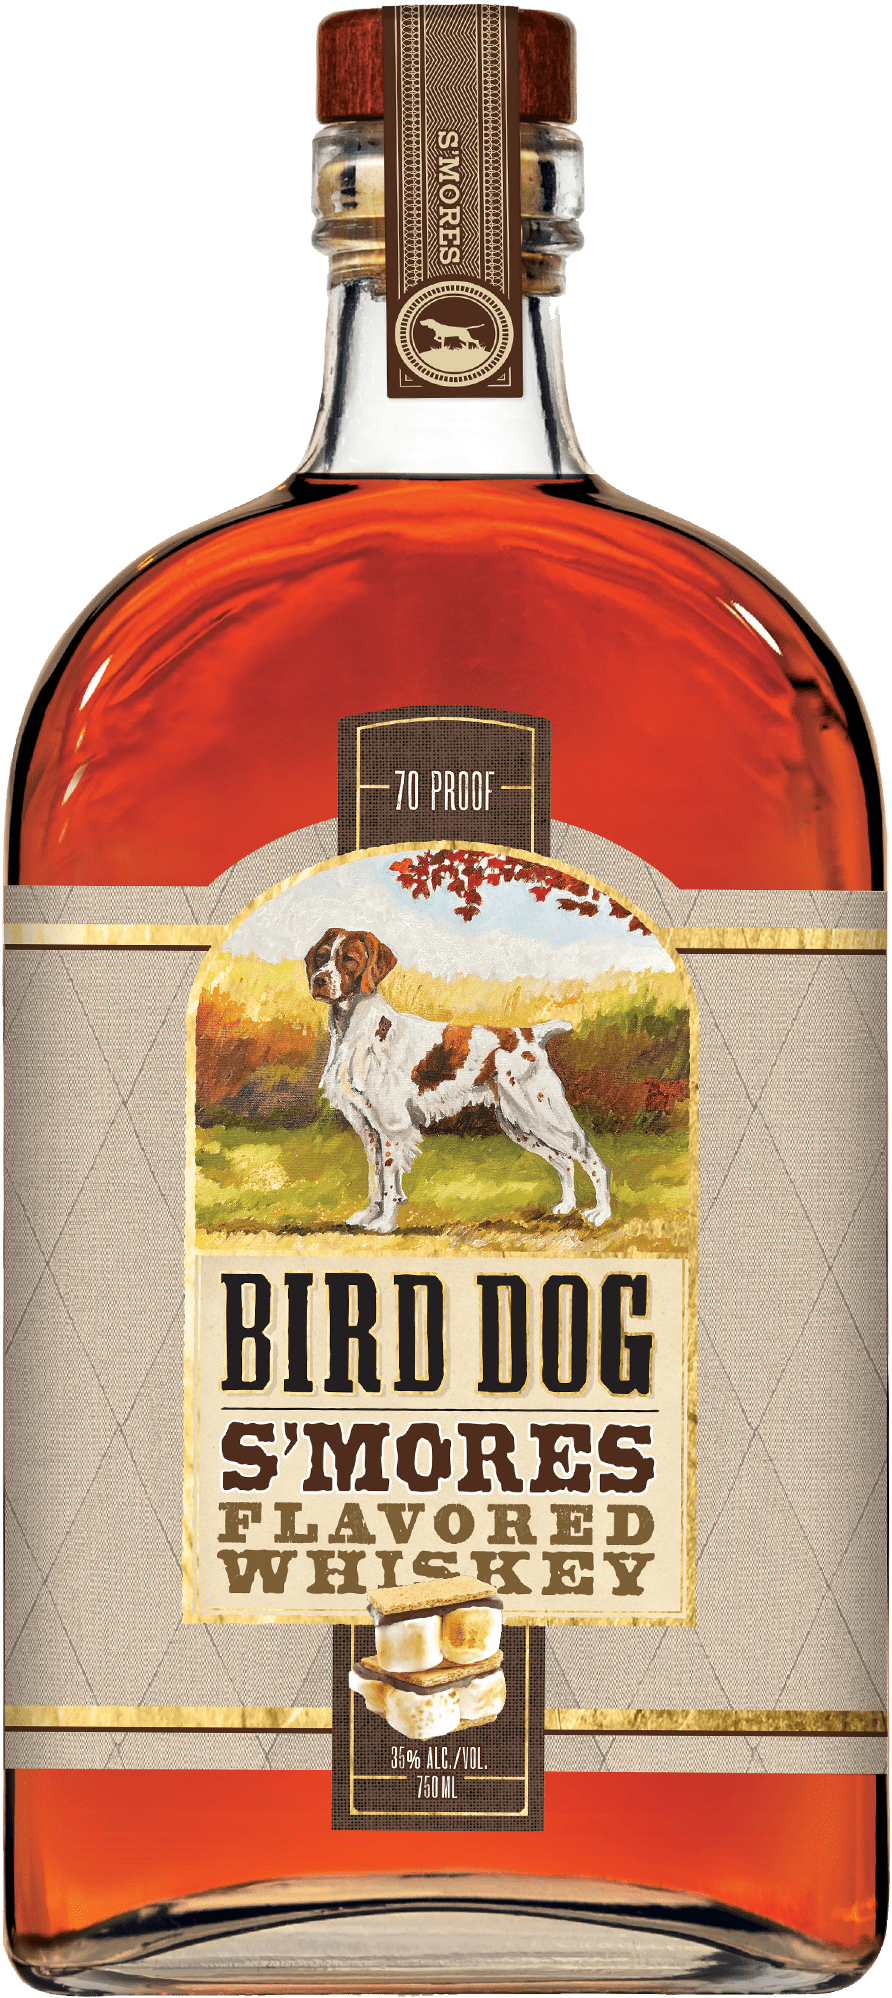 bottle of bird dog s'mores flavored whiskey